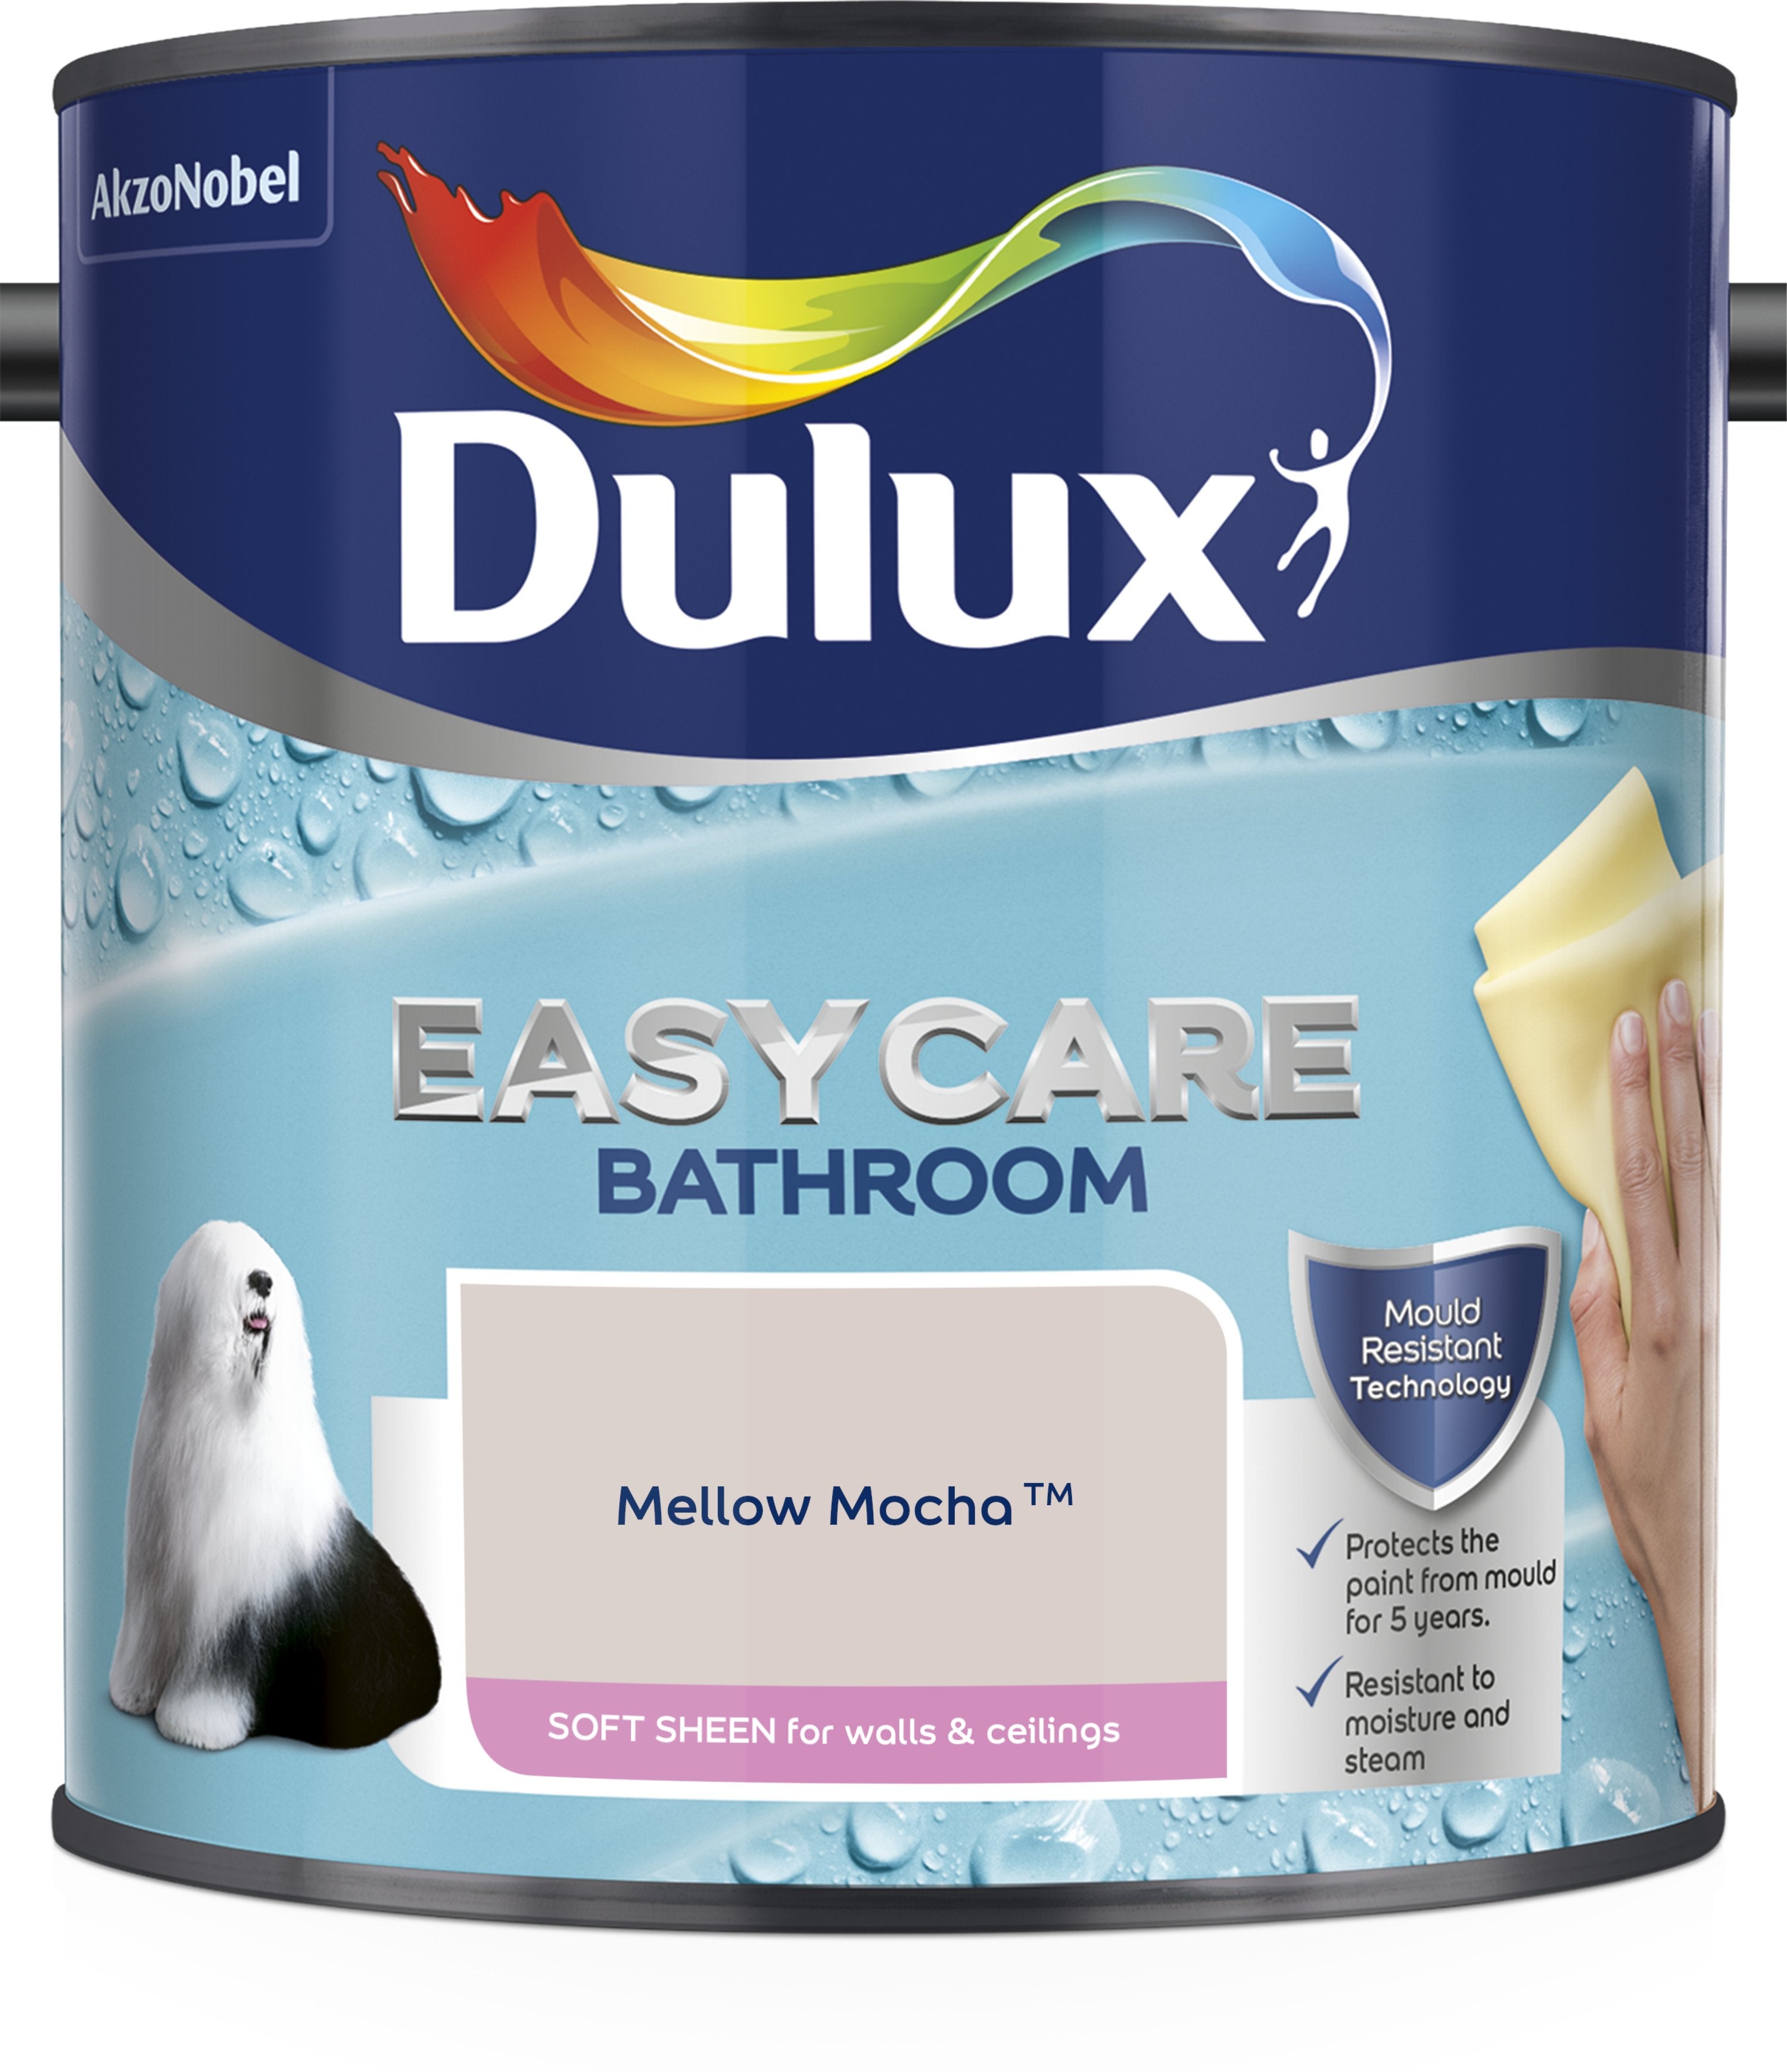 Dulux-Easycare-Bathroom-Soft-Sheen-Emulsion-Paint For-Walls-And-Ceilings-Mellow-Mocha-2.5L